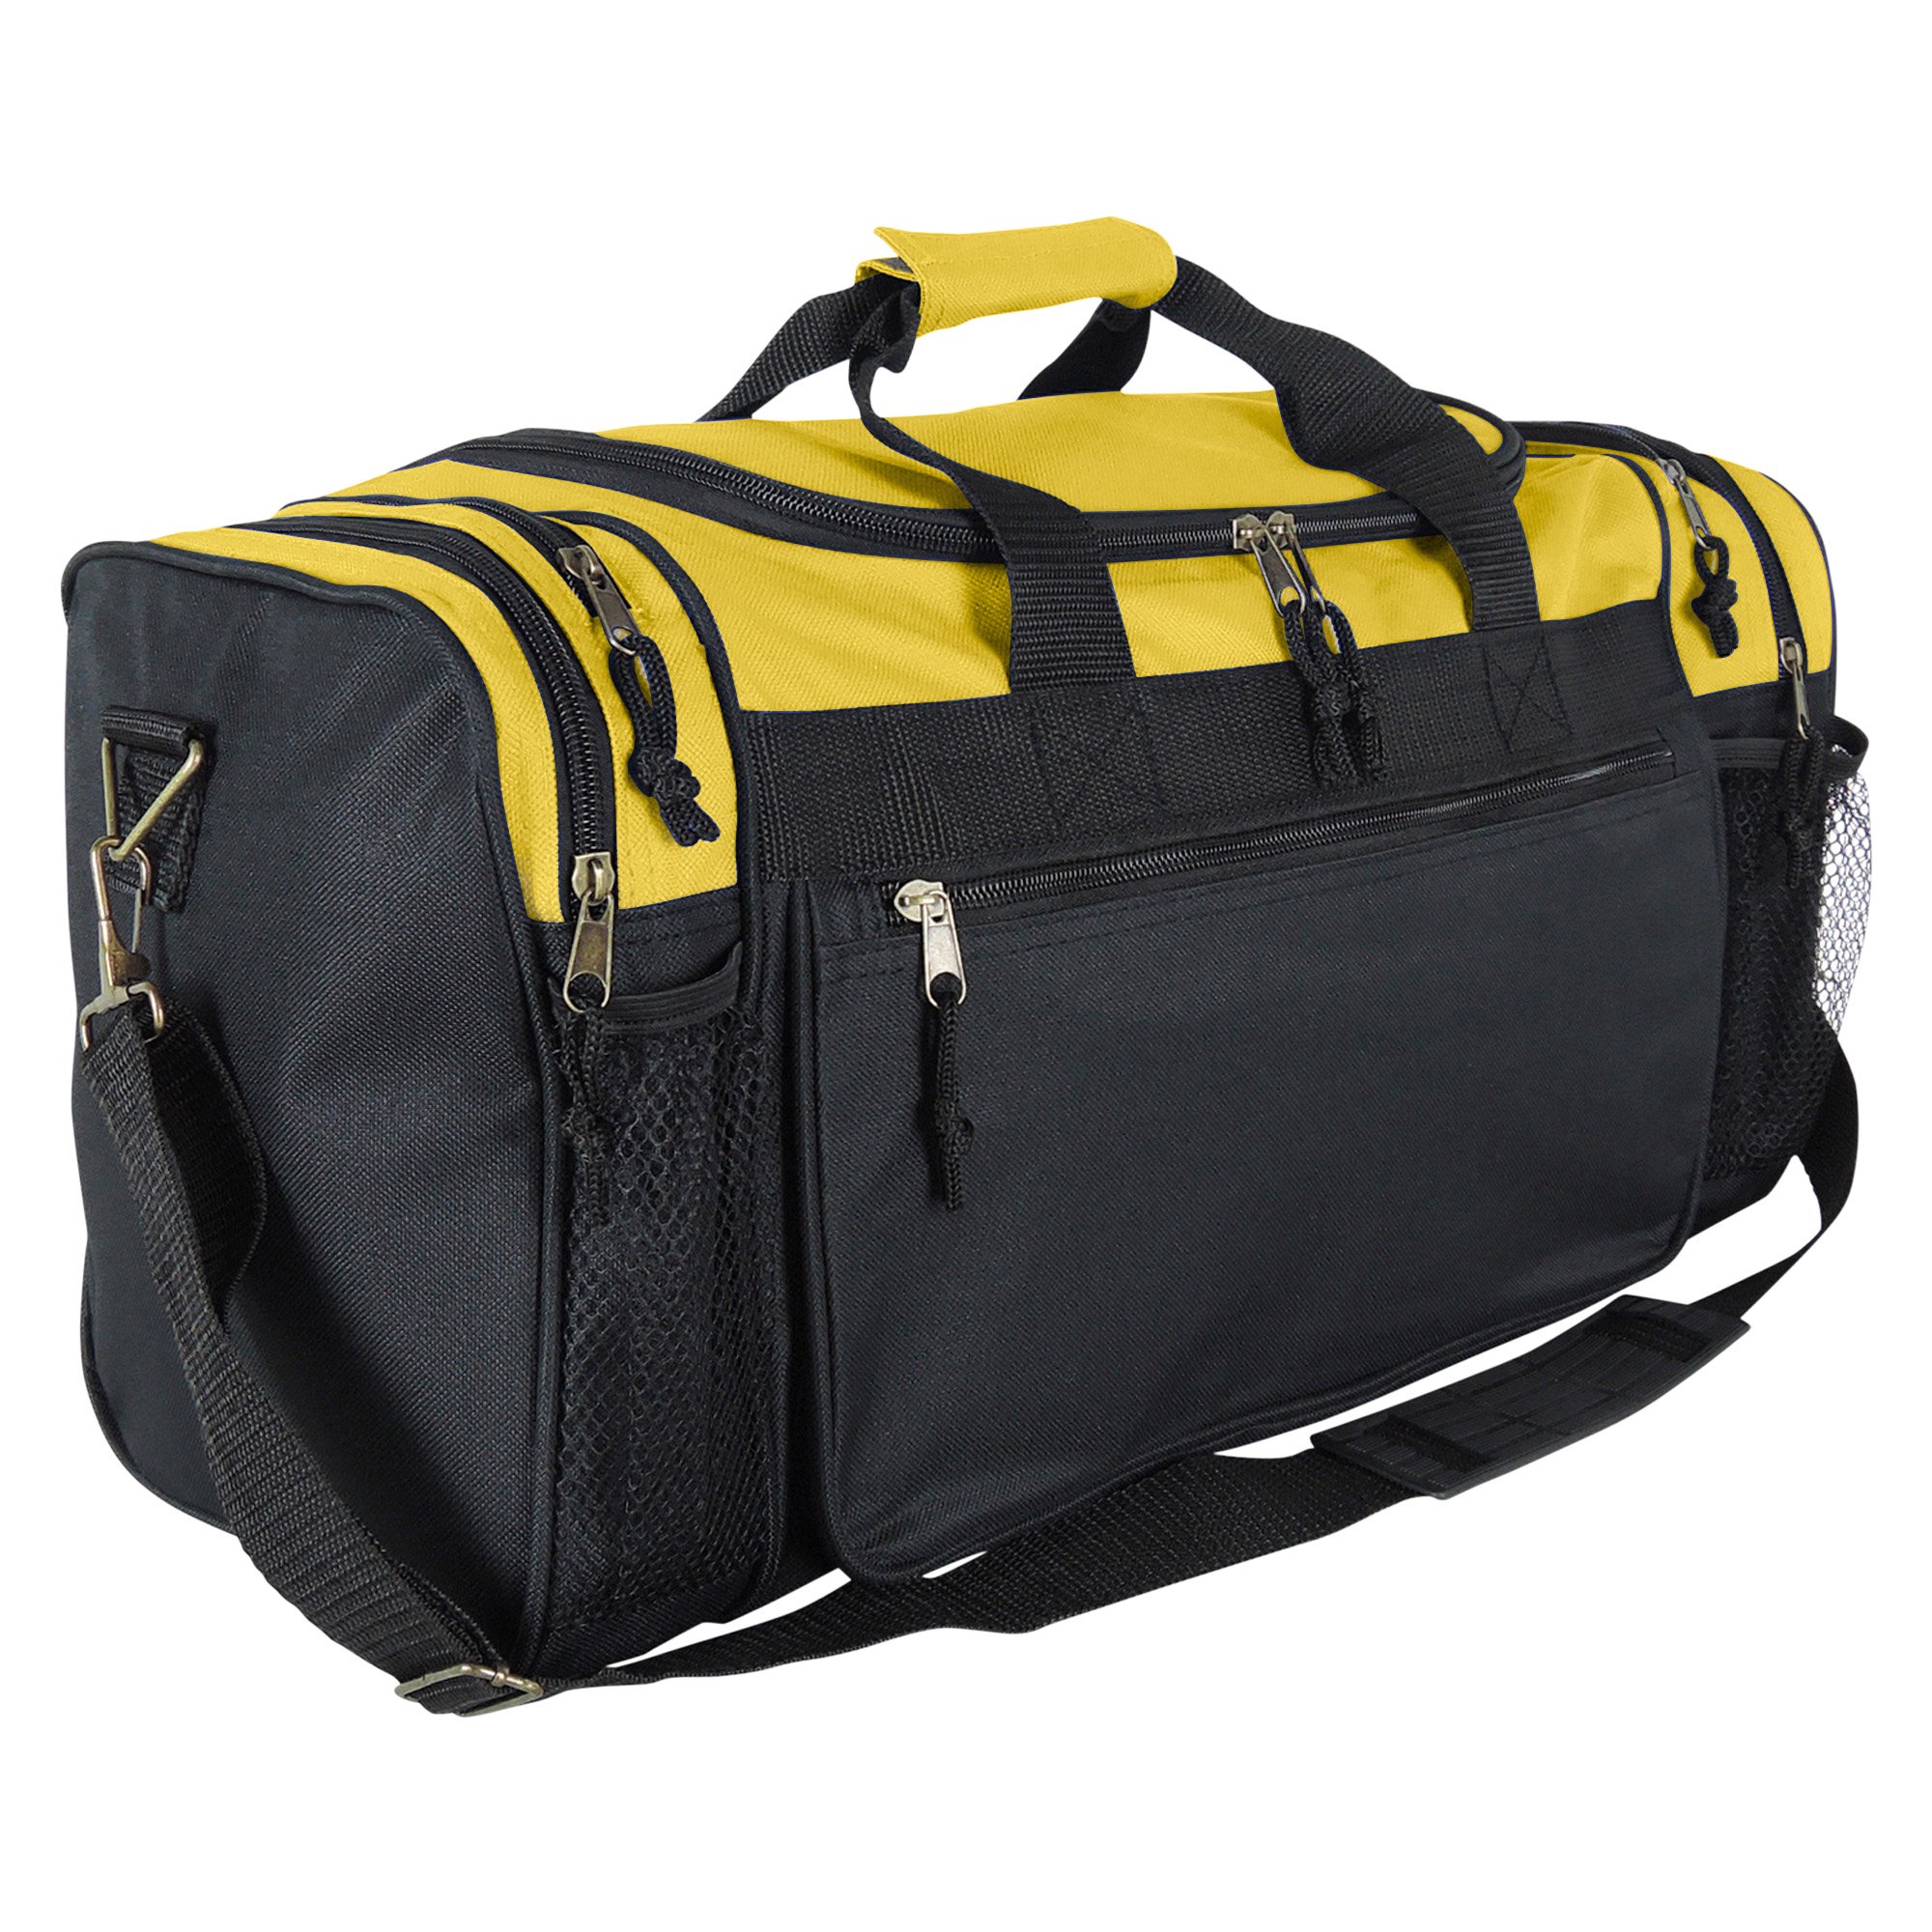 Wholesale High Quality Traveling Sport Gym Travel Large Duffel Bag